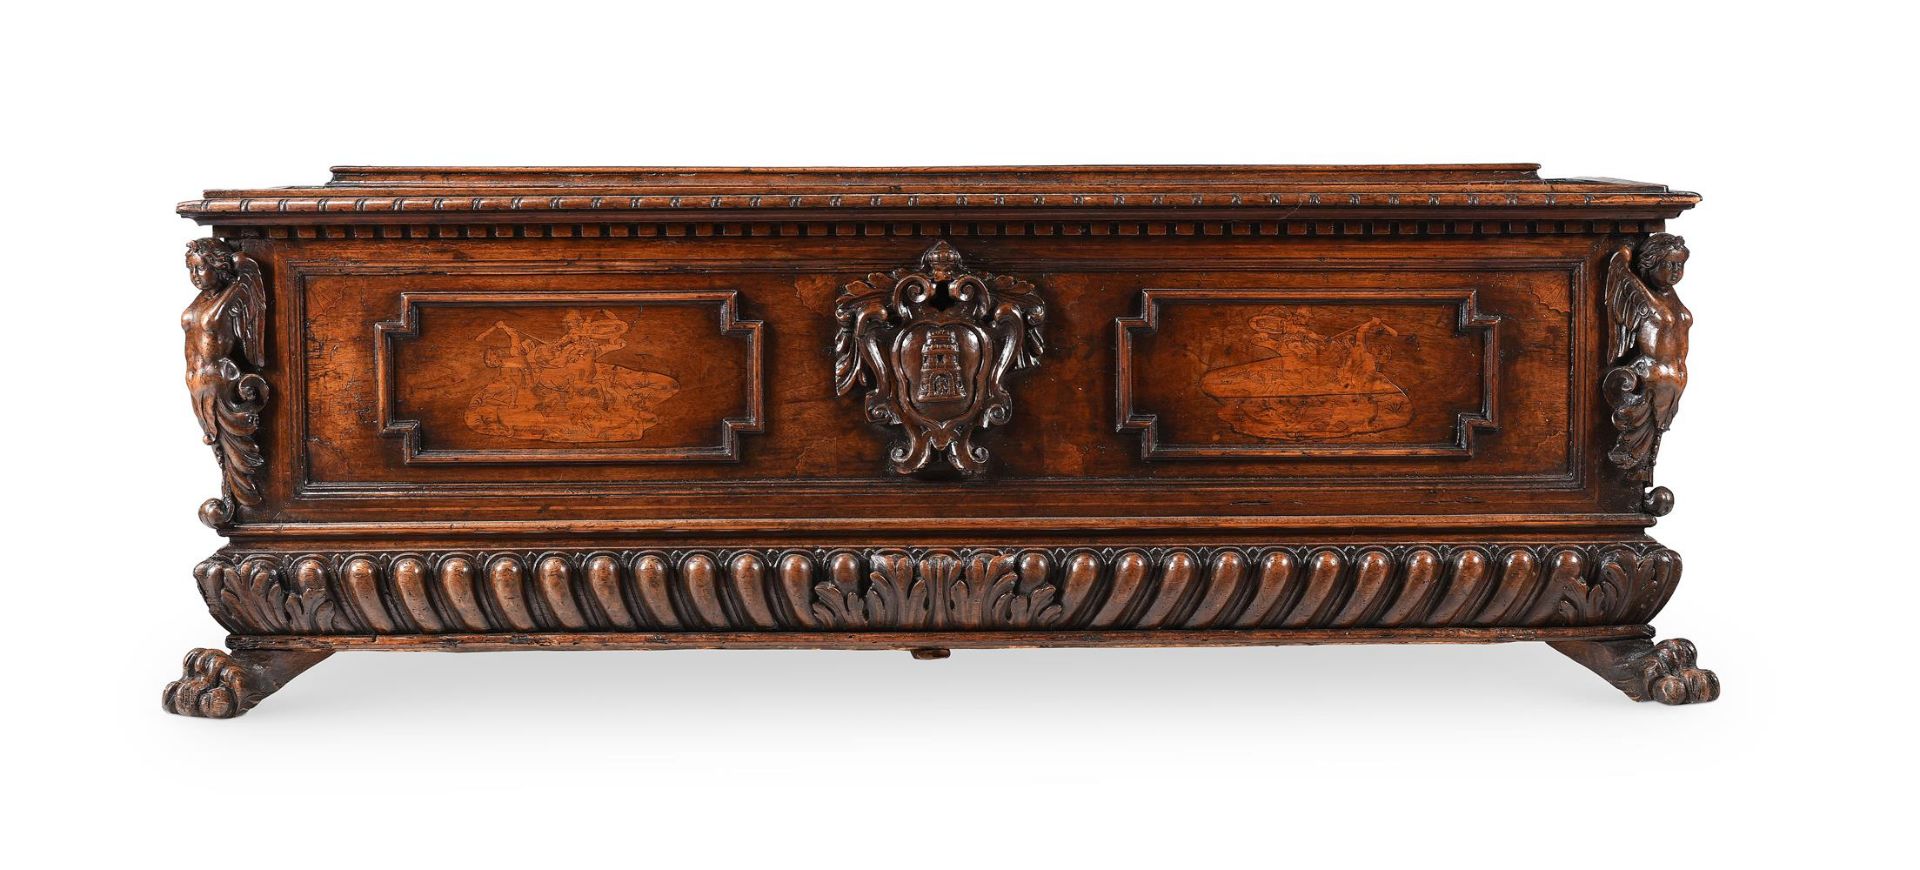 AN ITALIAN CARVED WALNUT AND INLAID CASSONE, EARLY 17TH CENTURY AND LATER ELEMENTS